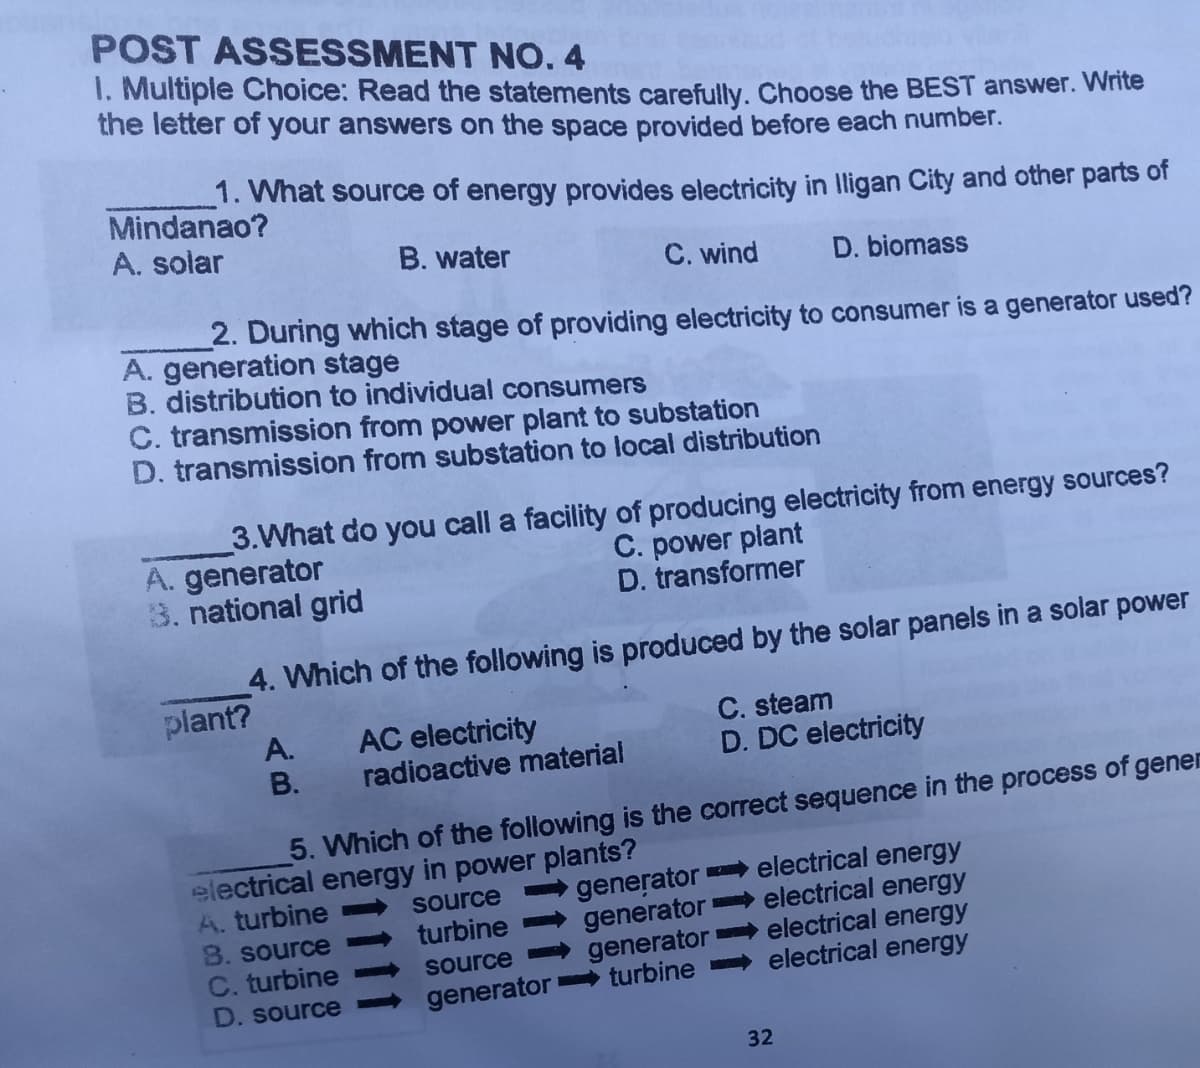 POST ASSESSMENT NO.4
I. Multiple Choice: Read the statements carefully. Choose the BEST answer. Write
the letter of your answers on the space provided before each number.
1. What source of energy provides electricity in lligan City and other parts of
Mindanao?
A. solar
B. water
C. wind
D. biomass
2. During which stage of providing electricity to consumer is a generator used?
A. generation stage
B. distribution to individual consumers
C. transmission from power plant to substation
D. transmission from substation to local distribution
3.What do you call a facility of producing electricity from energy sources?
A. generator
3. national grid
C. power plant
D. transformer
4. Which of the following is produced by the solar panels in a solar power
plant?
AC electricity
radioactive material
C. steam
D. DC electricity
А.
В.
5. Which of the following is the correct sequence in the process of gener
electrical energy in power plants?
A. turbine
8. source
C. turbine
D. source
generator electrical energy
electrical energy
source
turbine
generator
generator electrical energy
electrical energy
source
generator turbine
32
